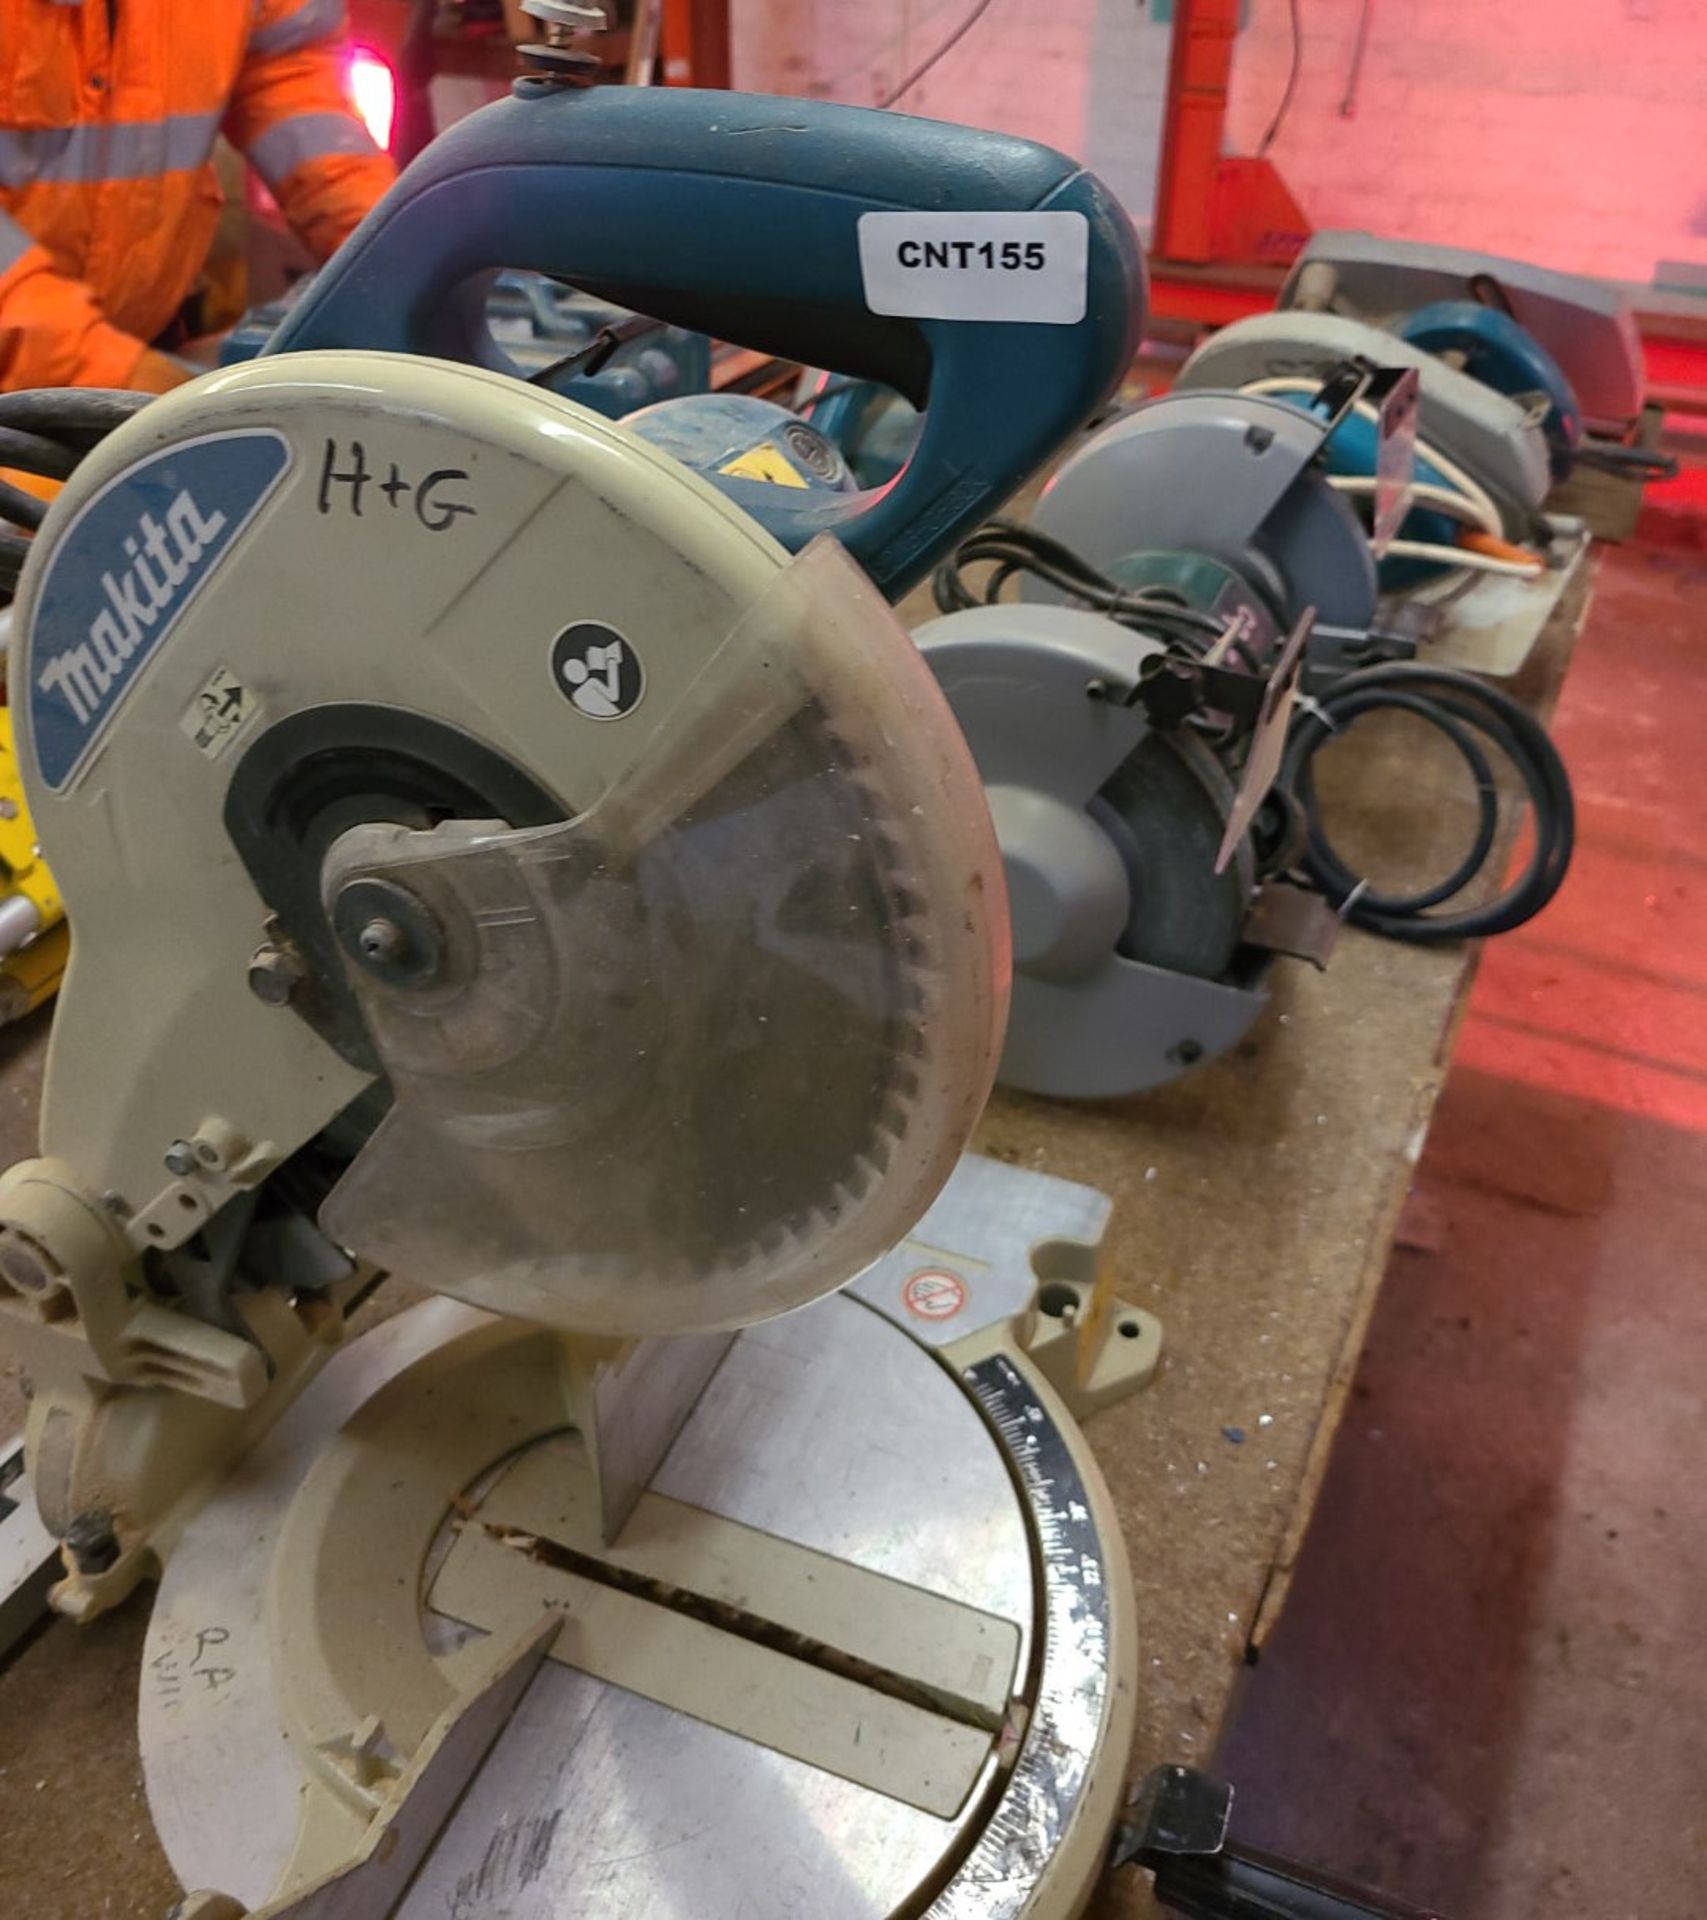 1 x Makita 110V Mitre Saw - Ref: CNT155 - CL846 - Location: Oxford OX2This lot is from a recently - Image 3 of 5